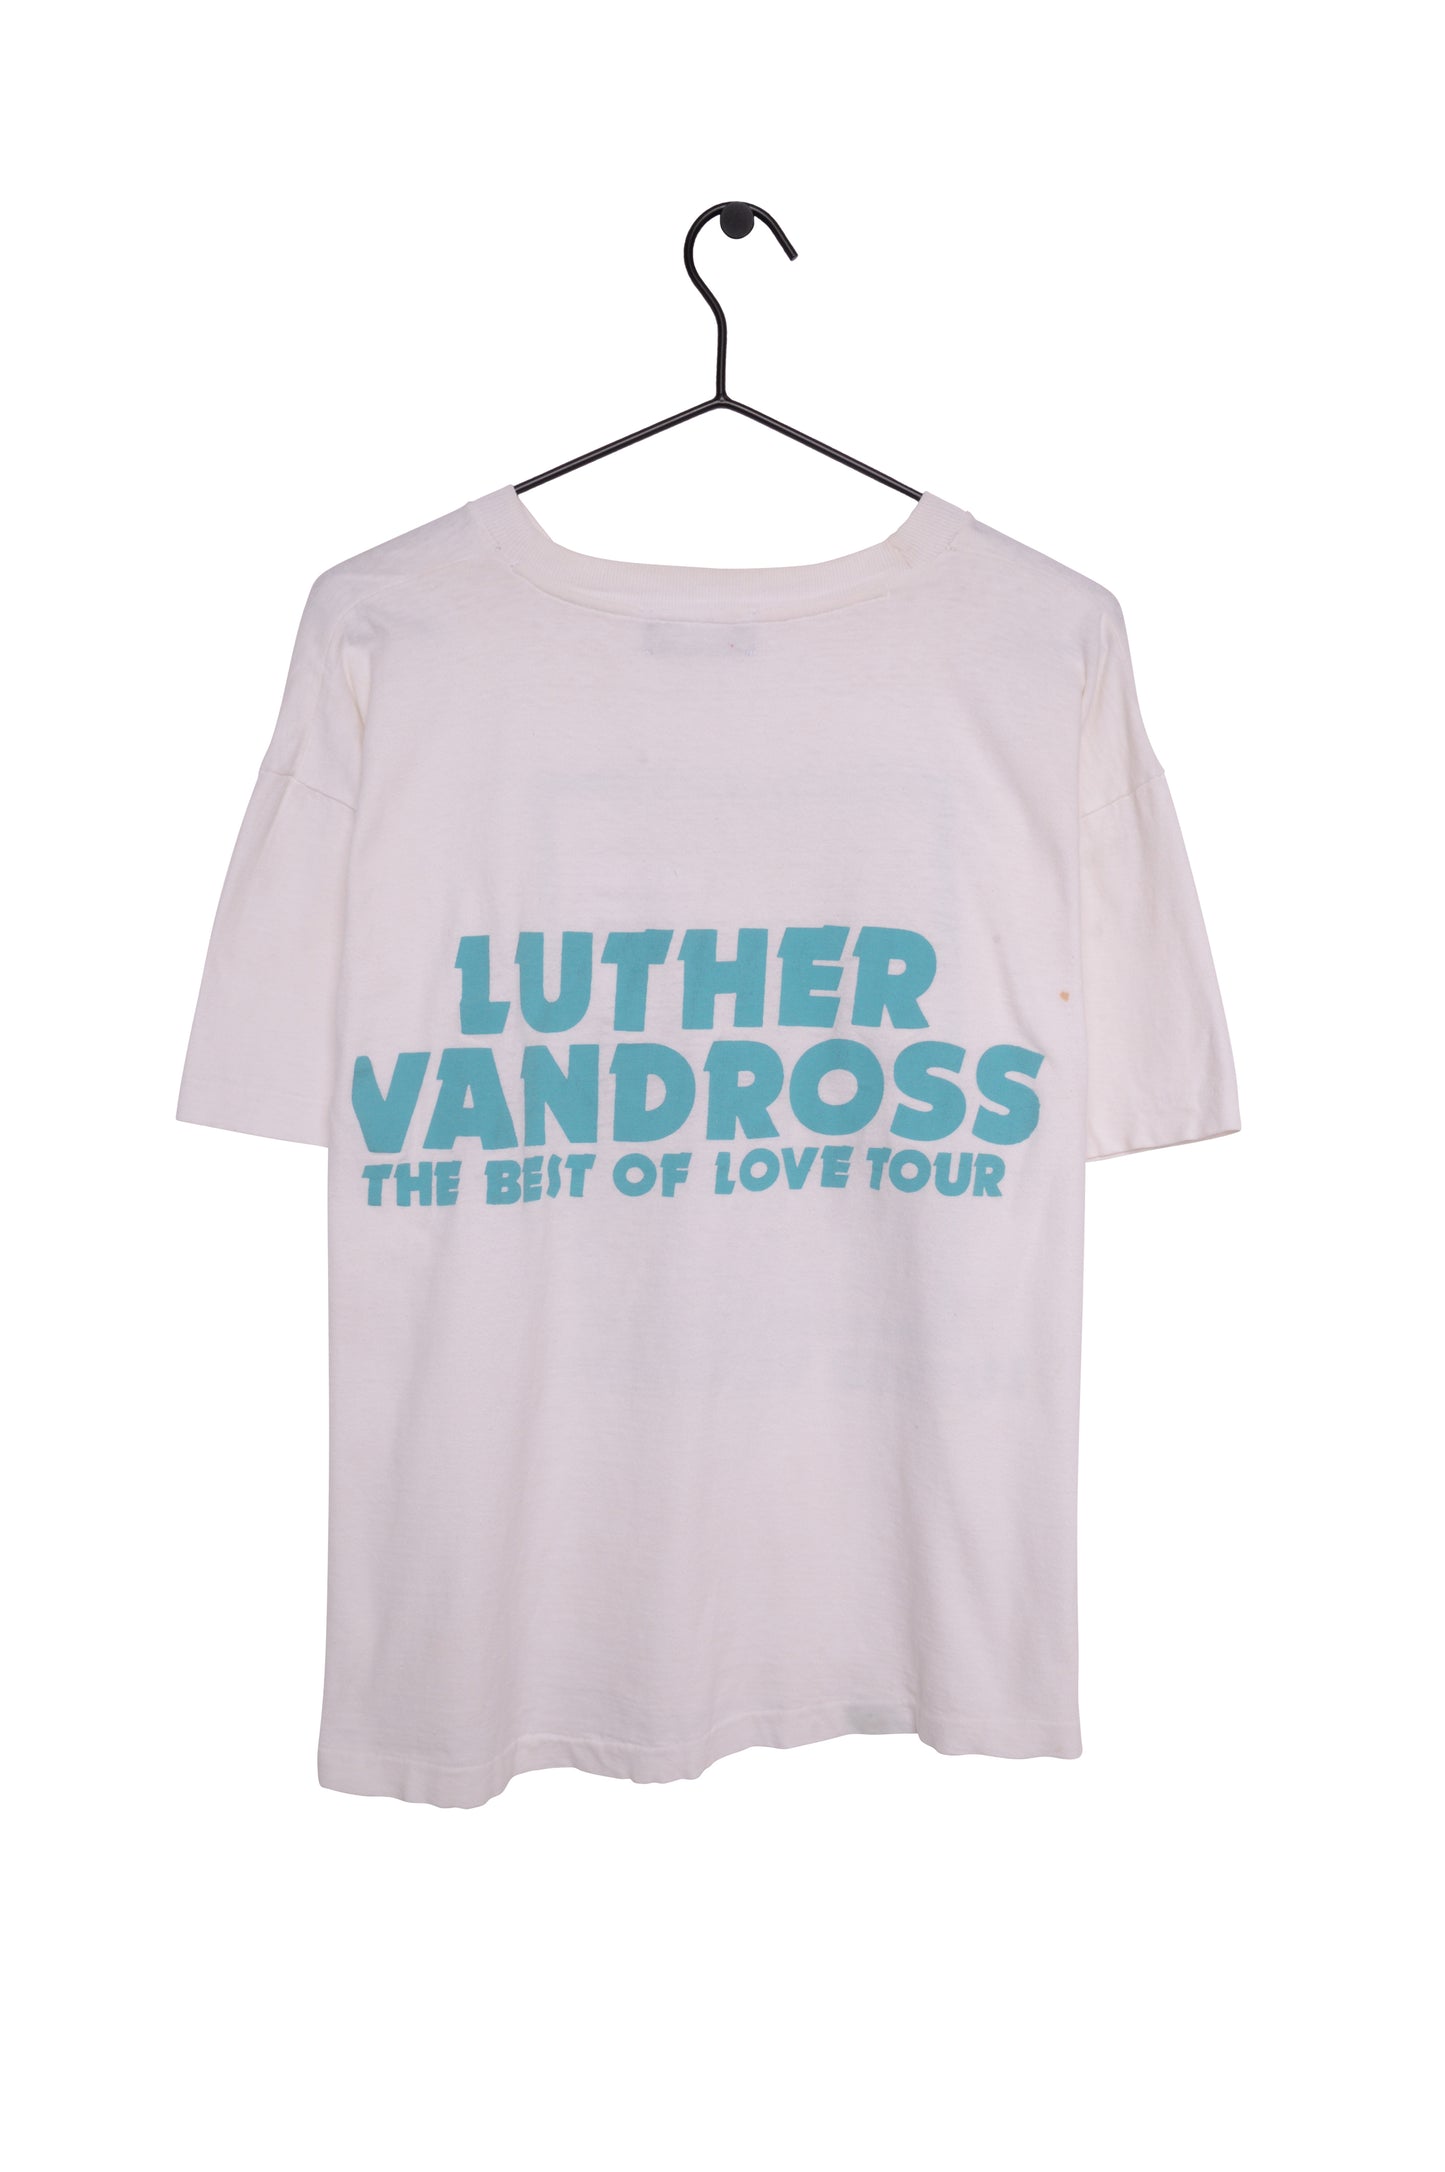 Luther Vandross Best Of Love Tour Tee